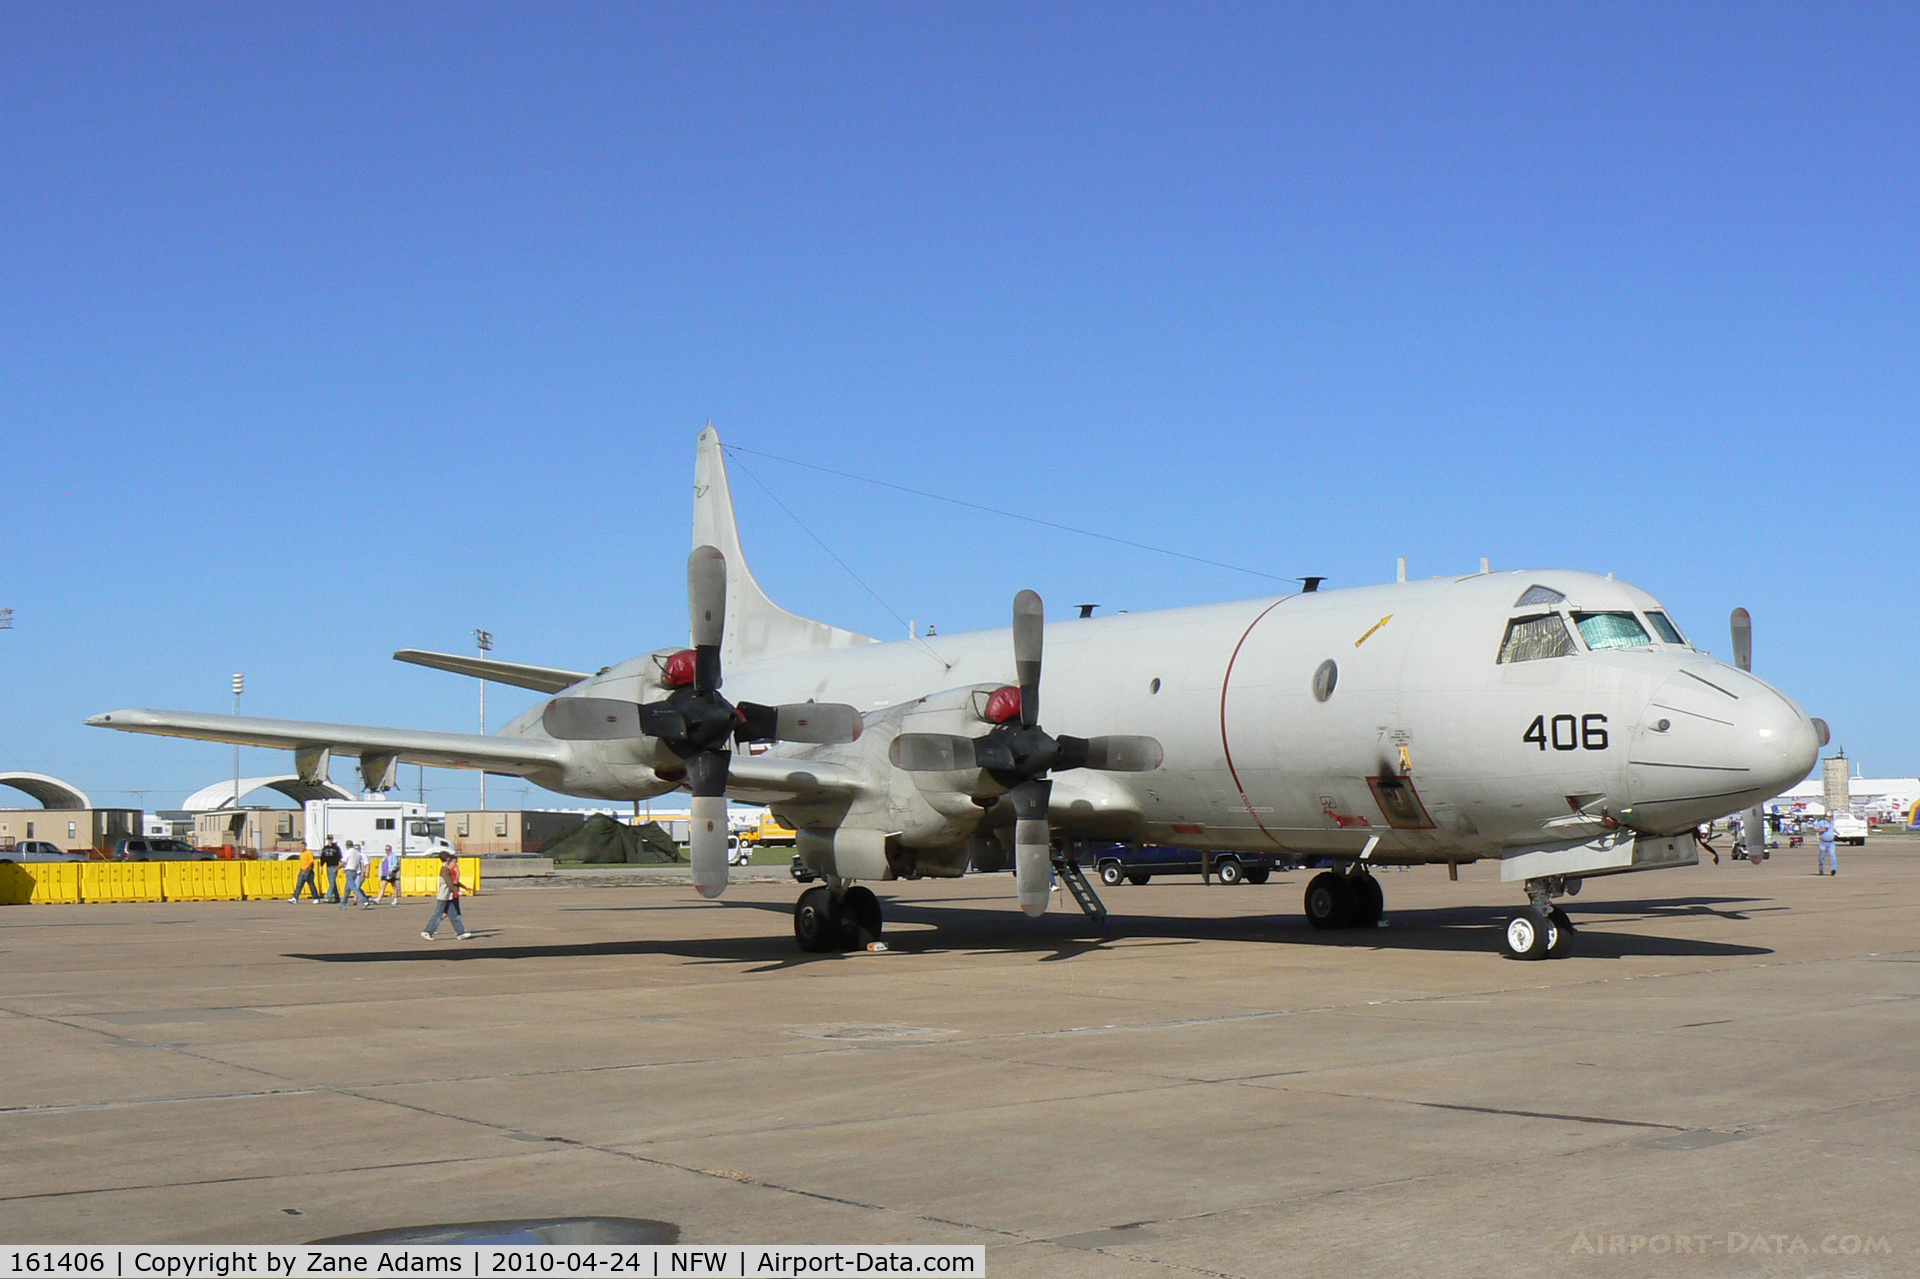 161406, Lockheed P-3C Orion C/N 285A-5743, At the 2010 NAS-JRB Fort Worth Airshow